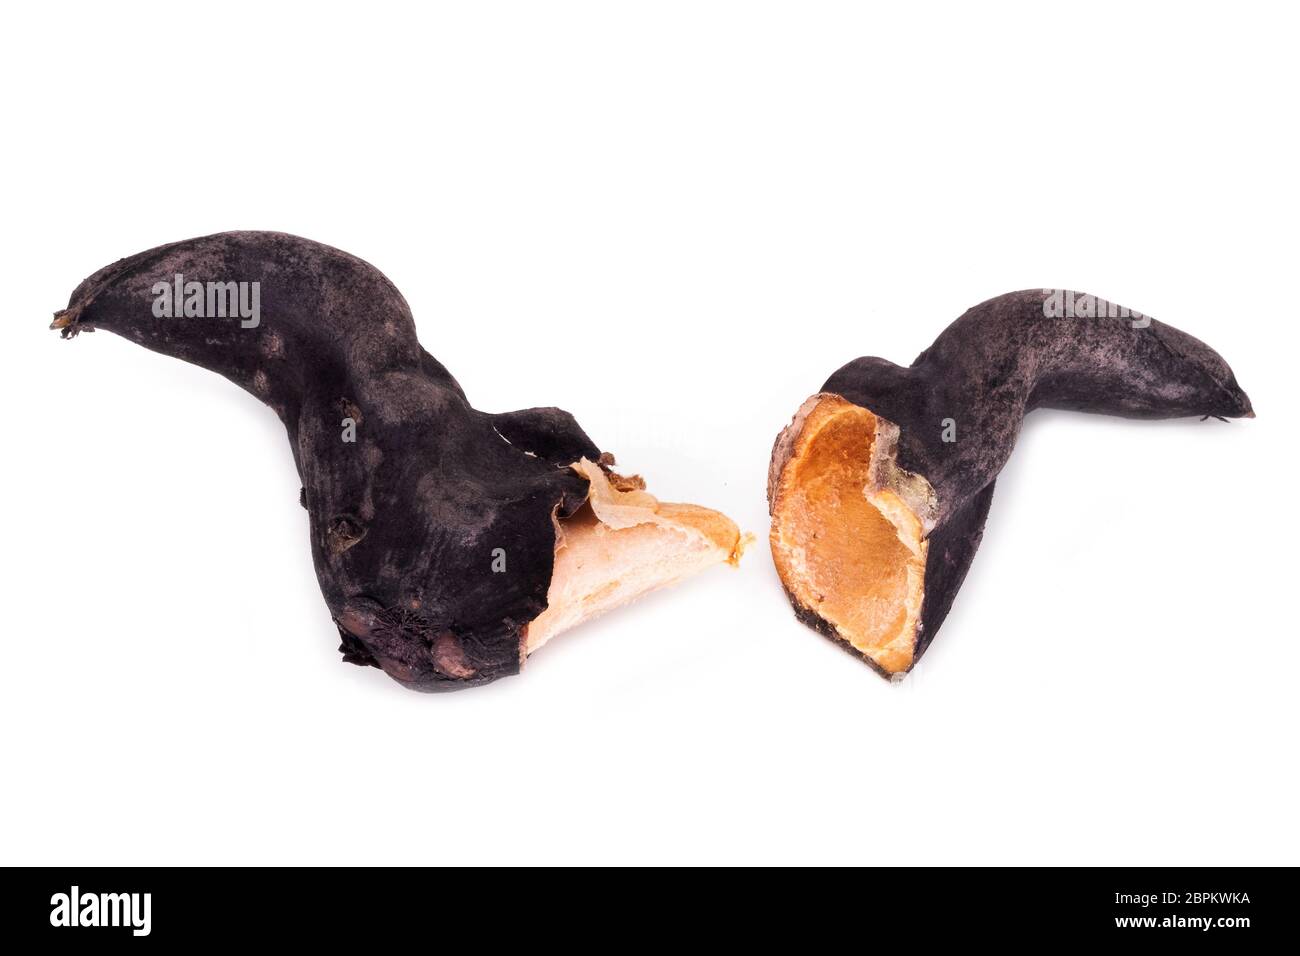 Water Caltrop, close up of black baffalo horn nut on white background Stock Photo